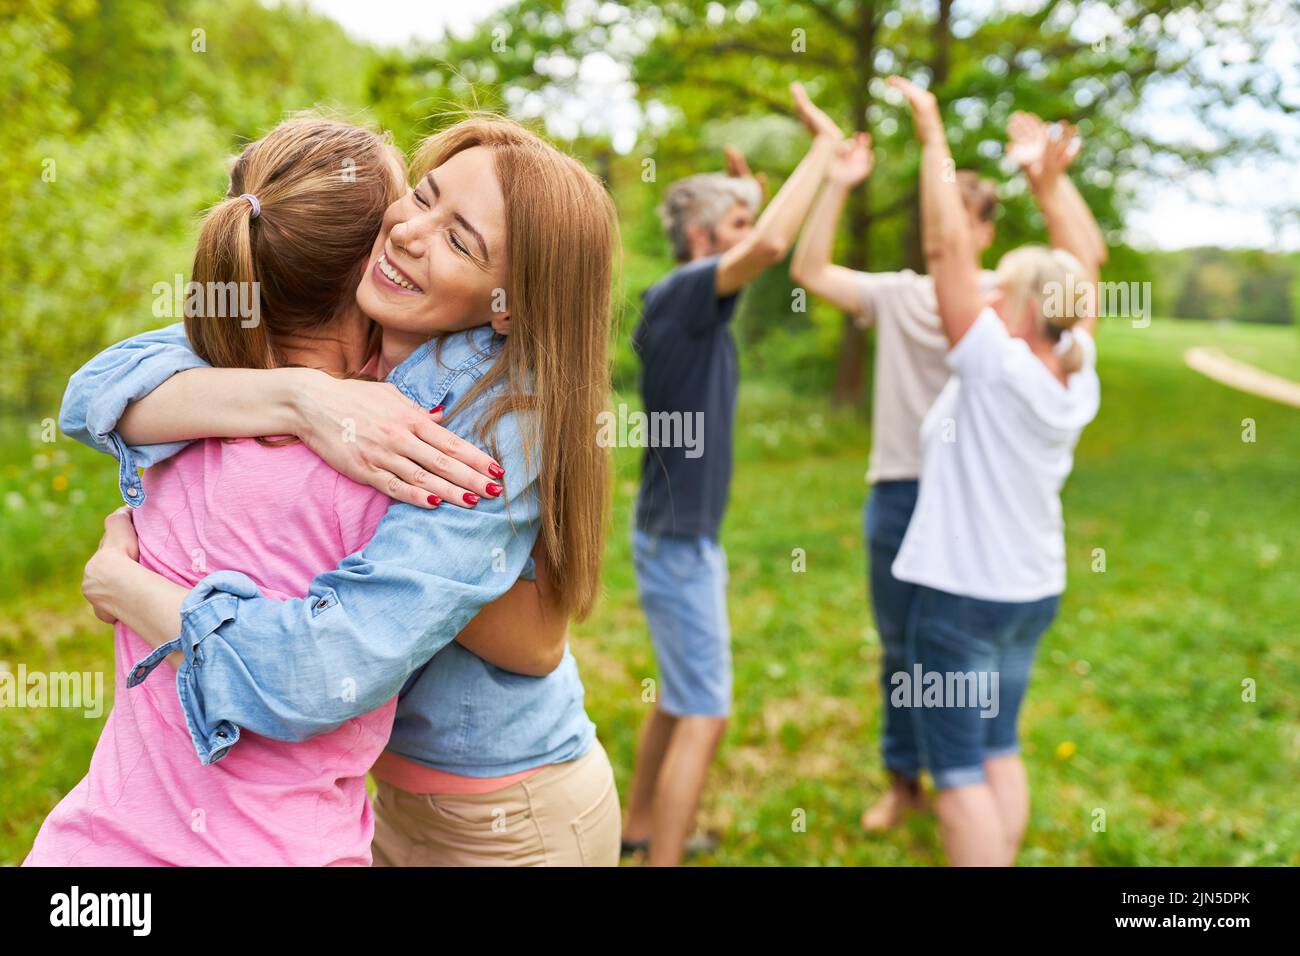 Two women hug and rejoice at team event after a success in competition Stock Photo